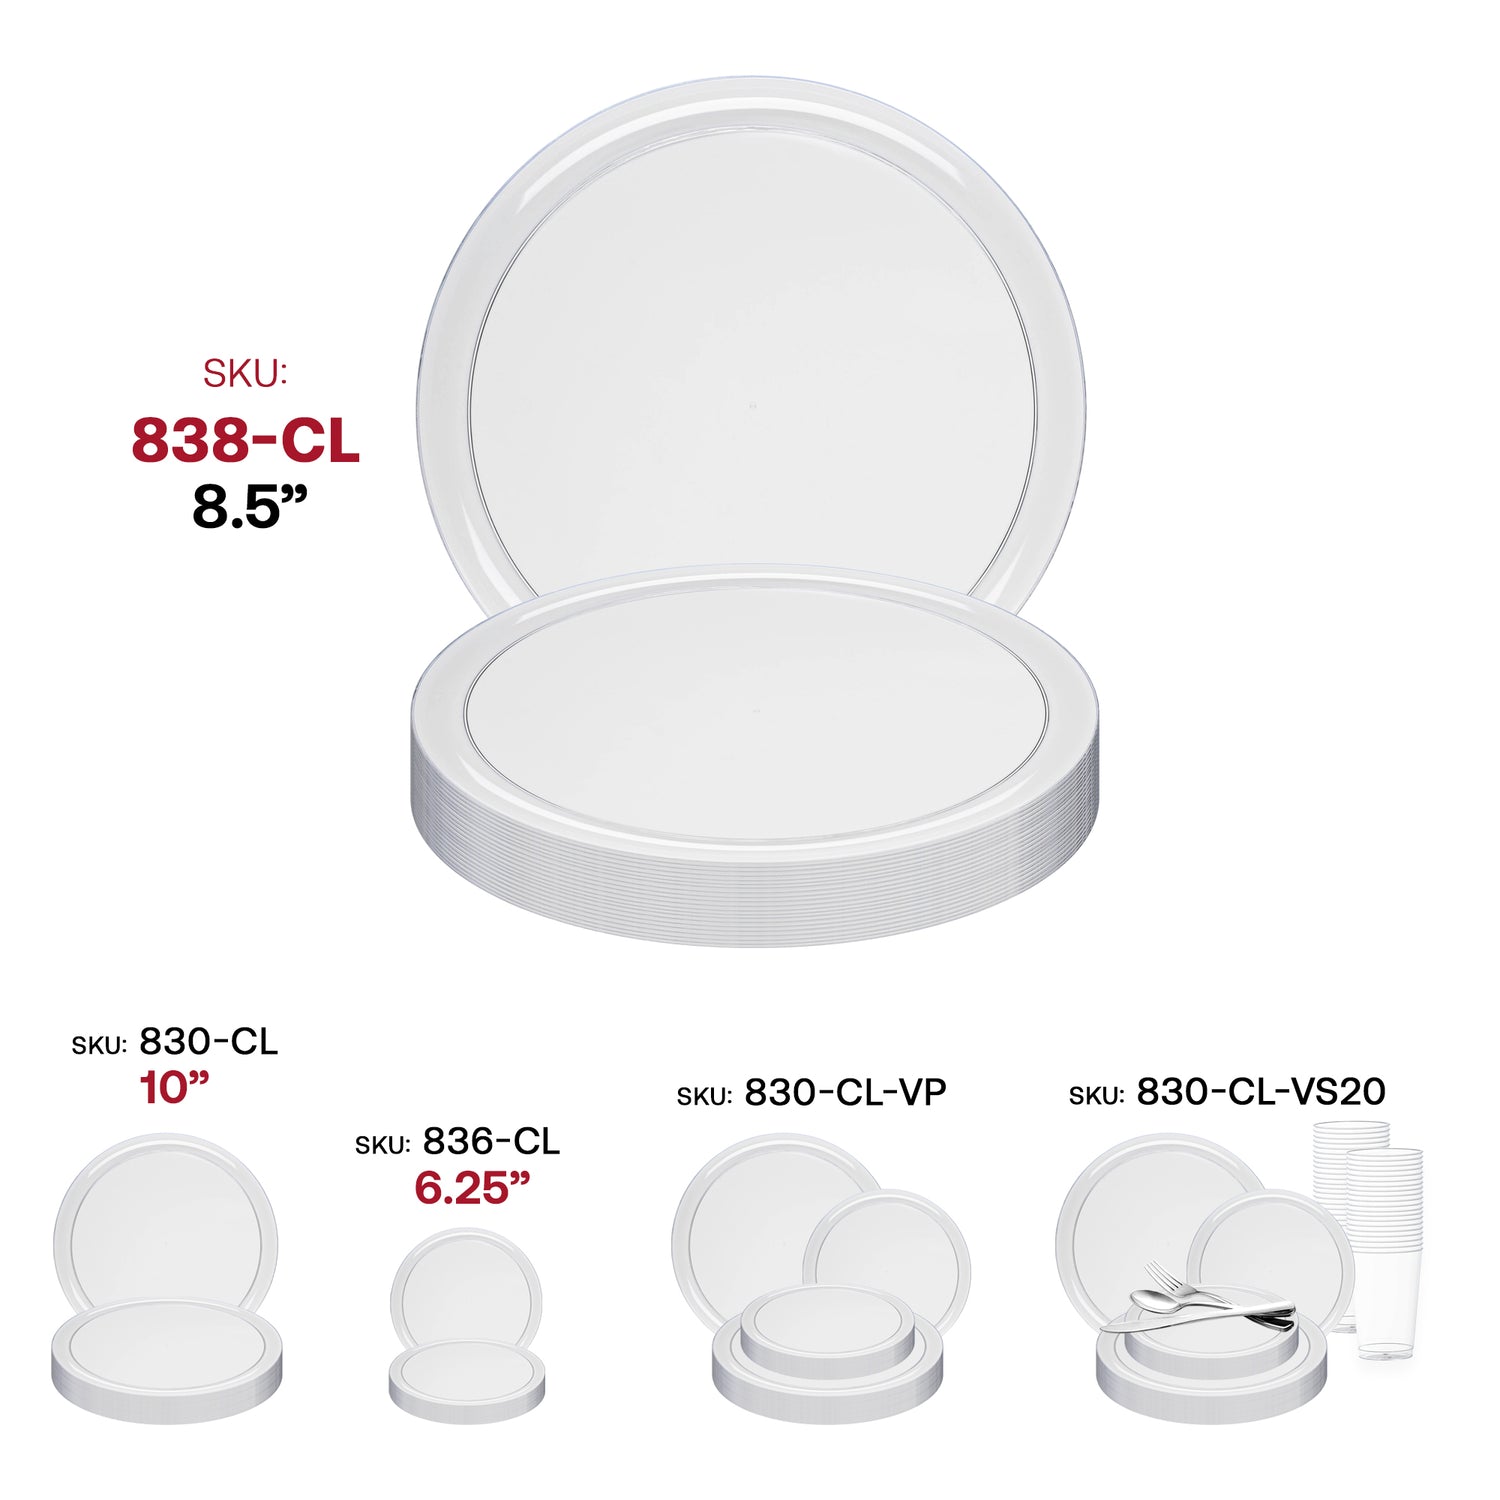 Clear Flat Round Disposable Plastic Appetizer/Salad Plates (8.5") SKU | The Kaya Collection